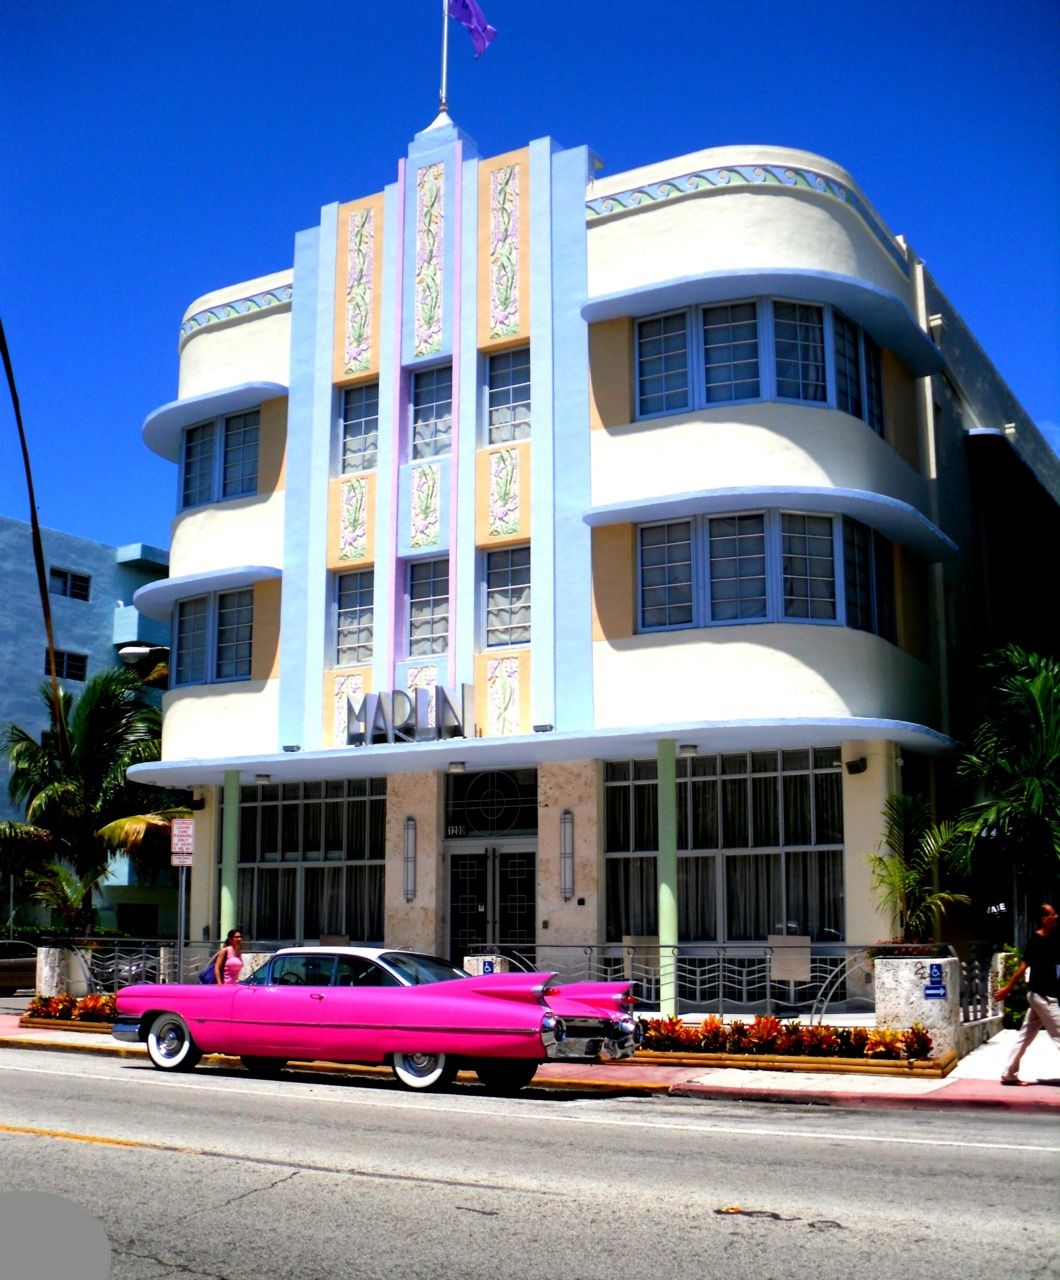 The Marlin Hotel is a boutique Art Deco gem located on Collins Avenue, known for its sleek lines, bold colors, and decorative details. Built in 1939, it has been beautifully restored and is now a luxury hotel that combines vintage charm with modern amenities.]]>